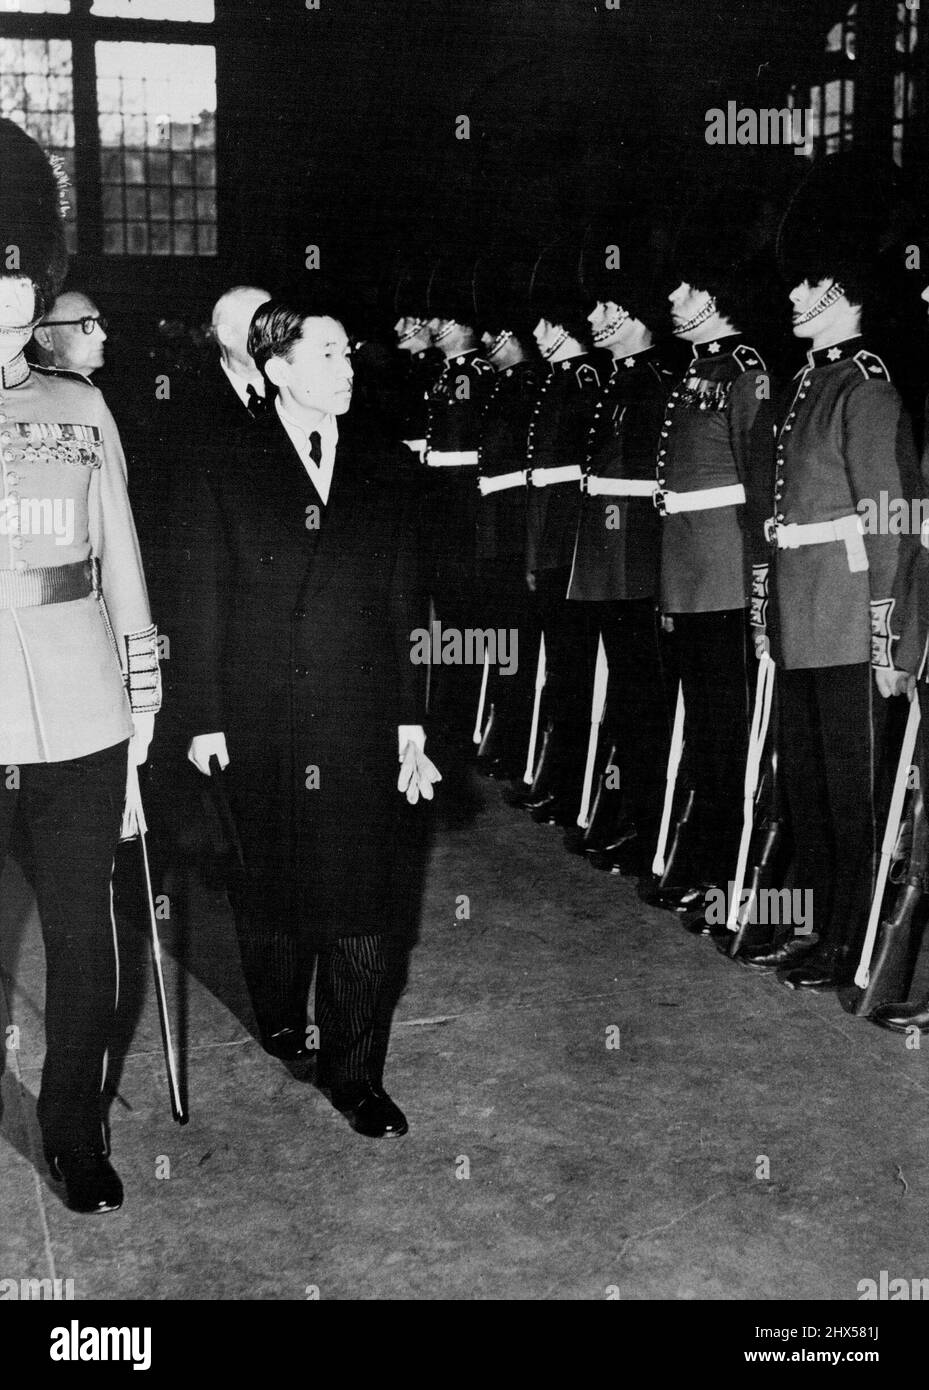 Prince Akihito Of Japan's Tour Of Canada -- Prince Akihito of Japan inspecting the Guard of Honour of the Governor General's Footguard, on his arrival at Union Station, Ottawa. Prince Akihito of Japan on his arrival at Government House, Ottawa, was greeted by the Hon. Vincent Massey, the Governor General of Canada. April 27, 1953. (Photo by Fox Photos). Stock Photo